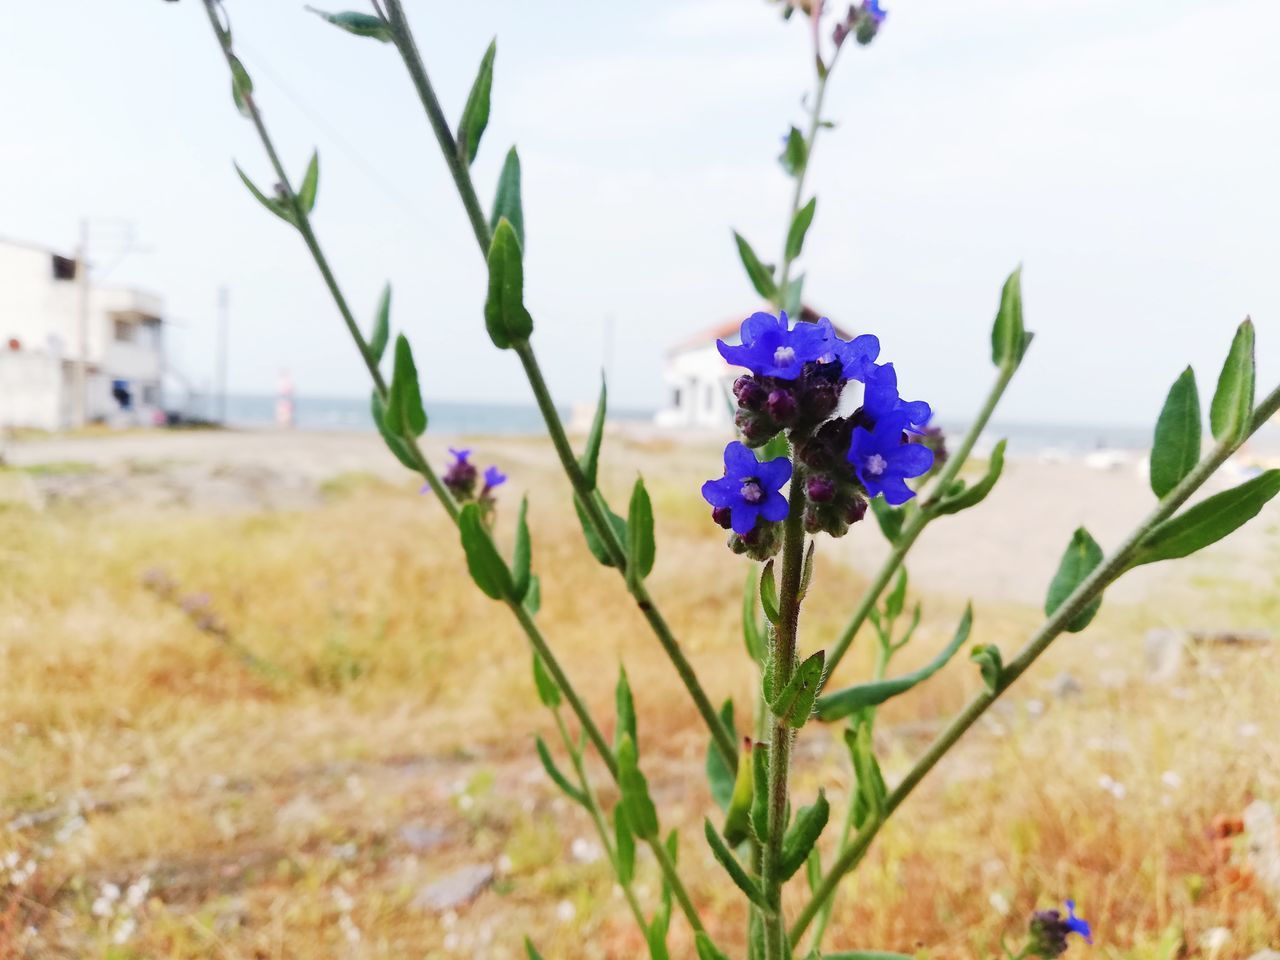 flowering plant, flower, plant, vulnerability, freshness, fragility, focus on foreground, beauty in nature, close-up, growth, nature, field, day, land, petal, purple, flower head, inflorescence, no people, plant part, outdoors